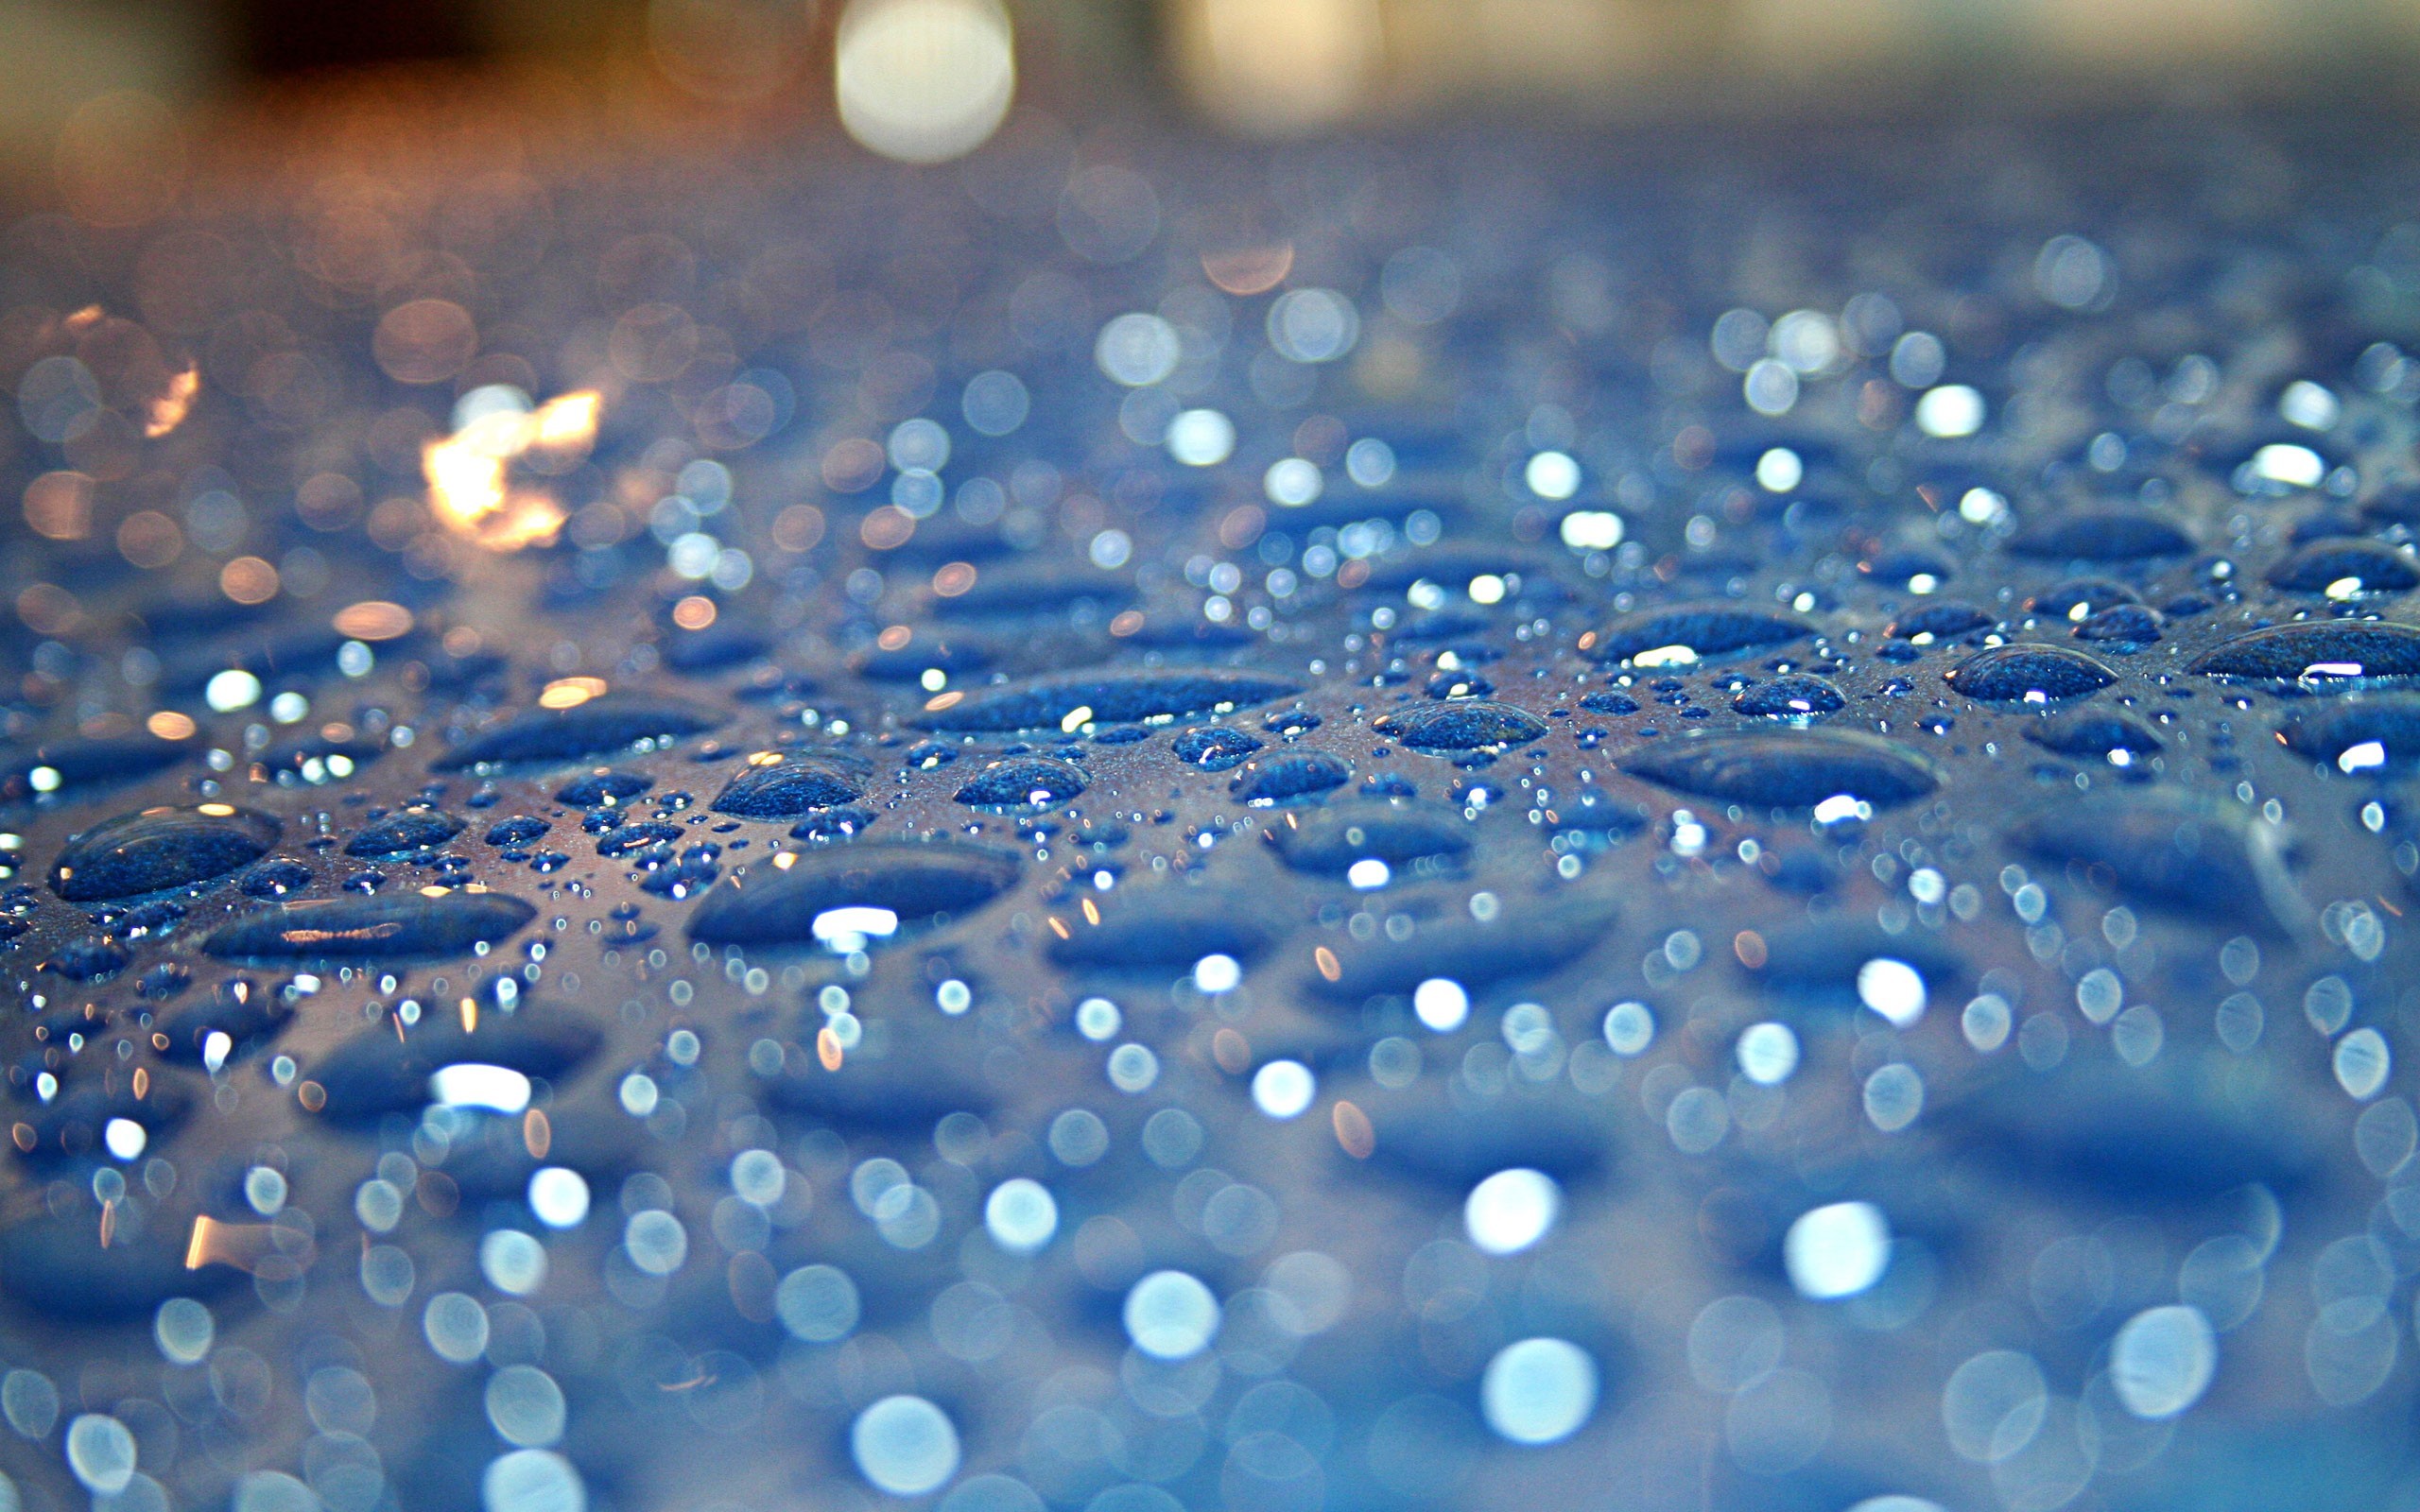 2560x1600 Colorful water drops hd wallpapers widescreen desktop images | Water |  Pinterest | Desktop images and Water drops